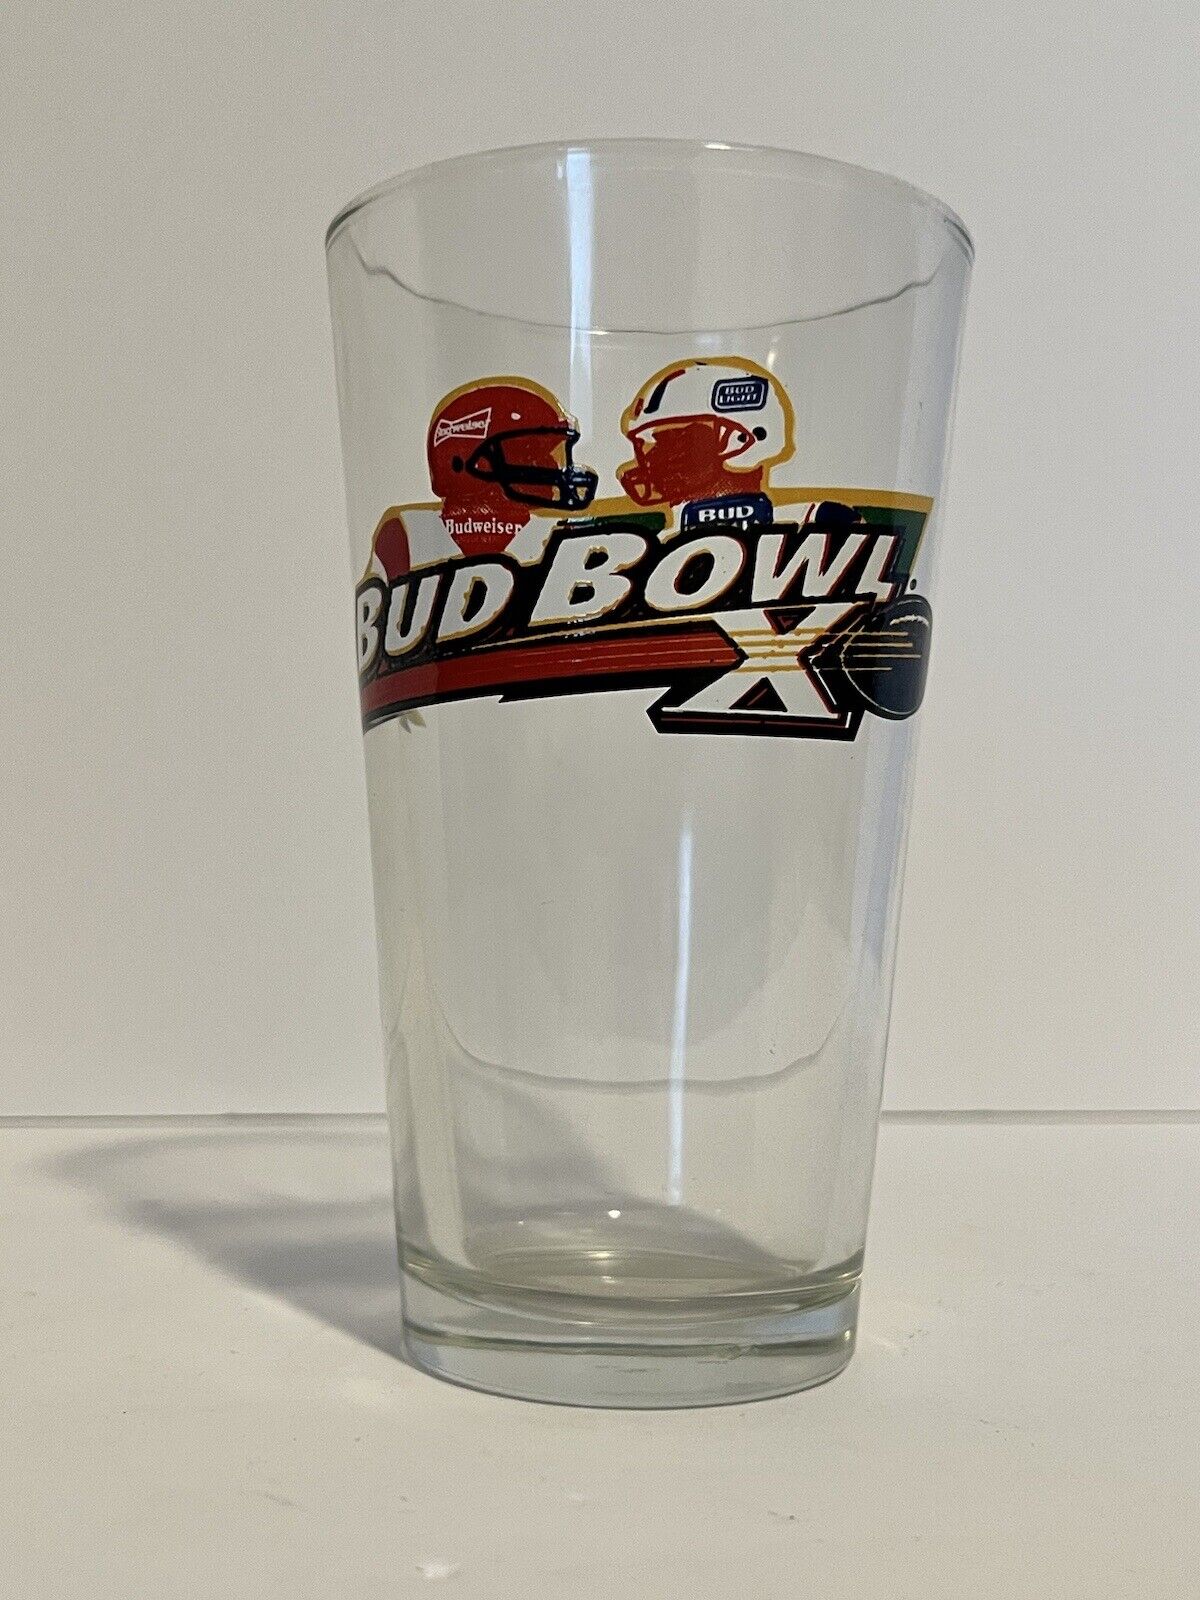 Vintage Bud Bowl X Glass Budweiser Bud Light Beer Glass - One Glass Only